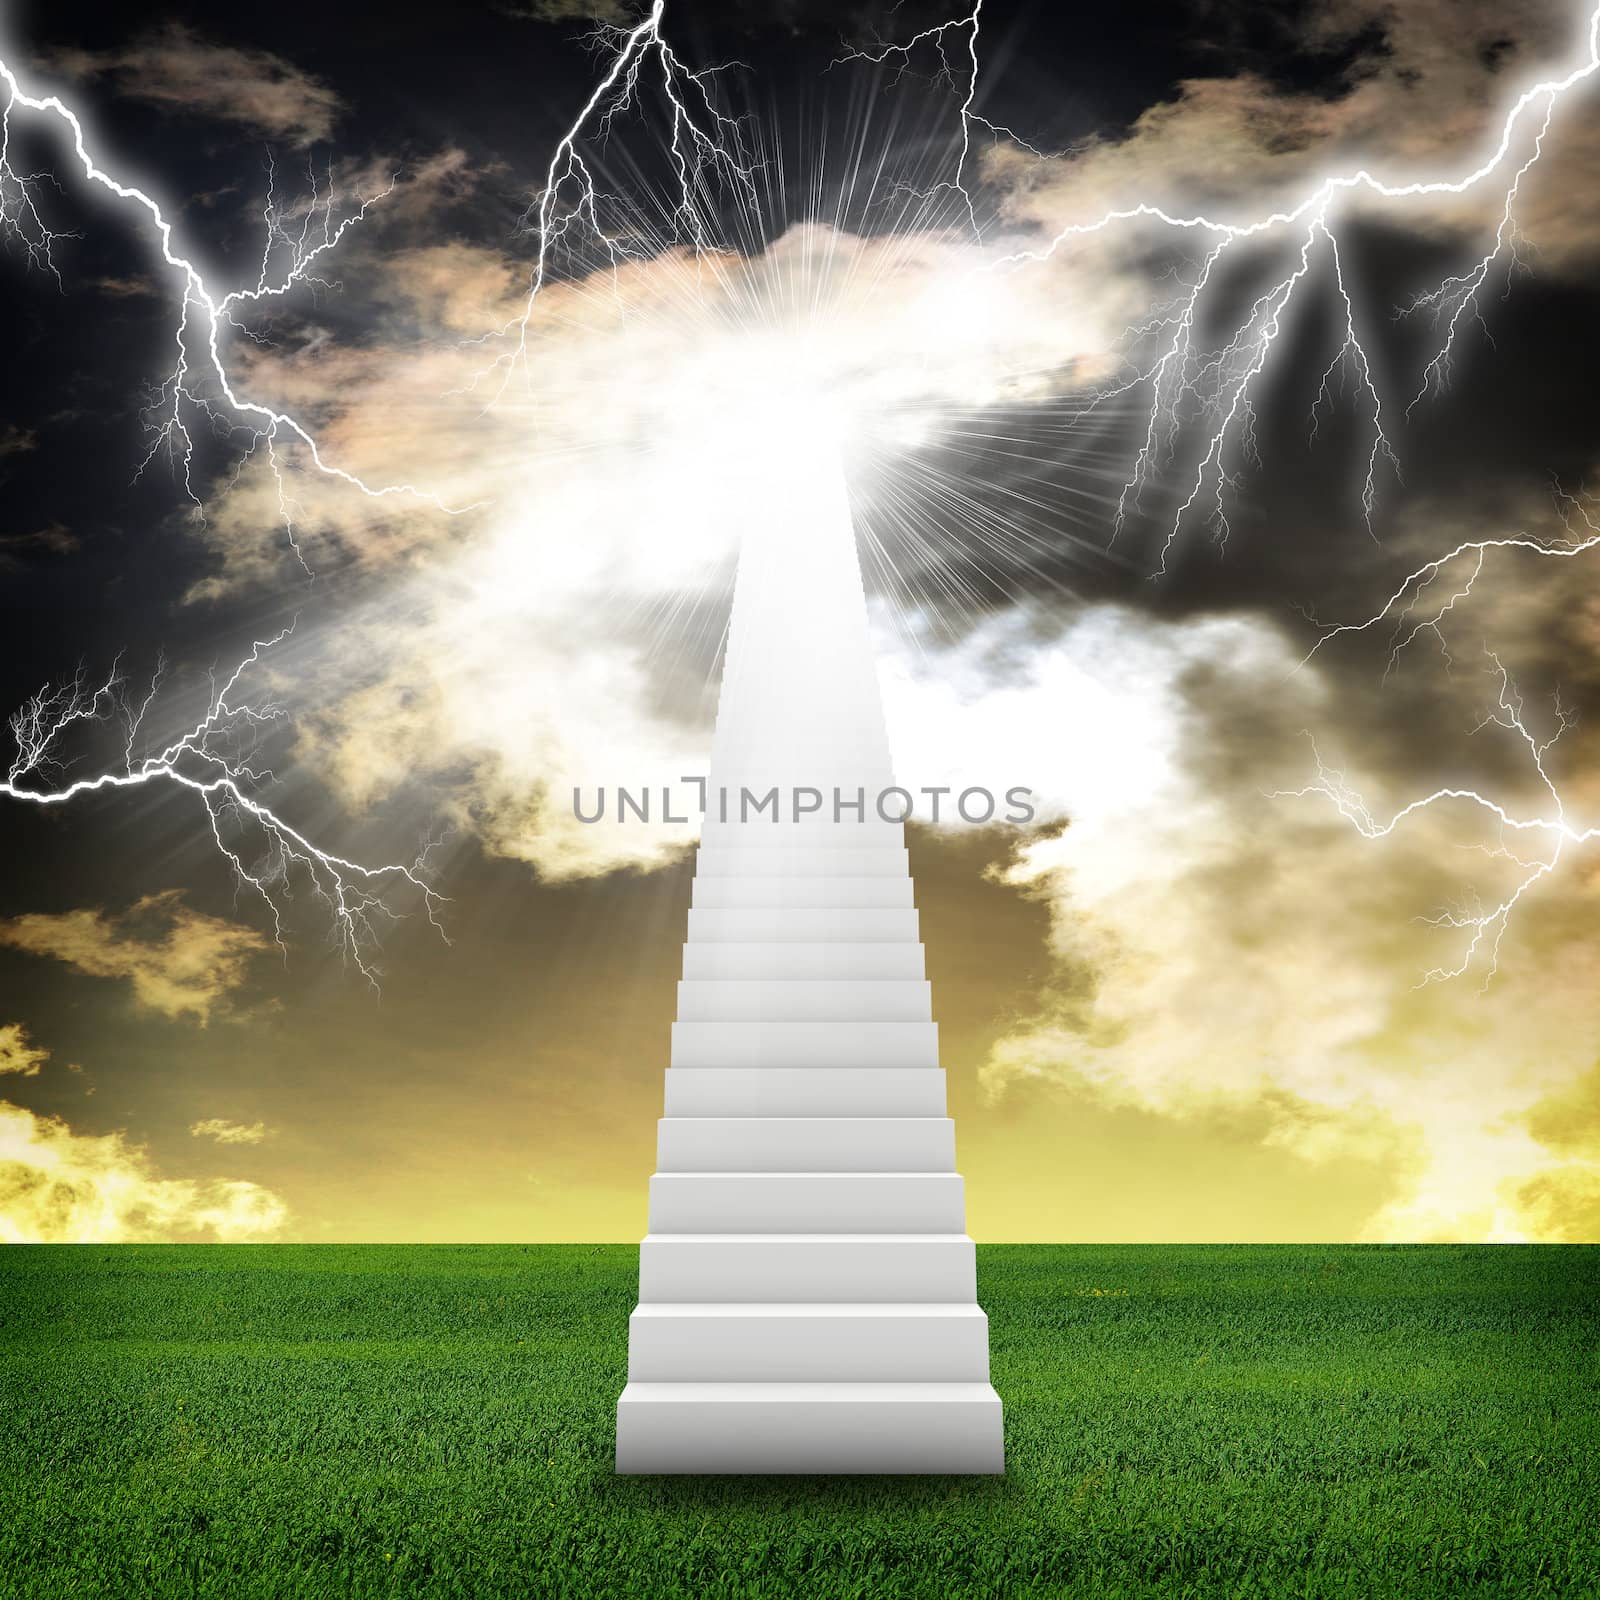 Stairs in sky with green grass and thunderstorm. Concept background